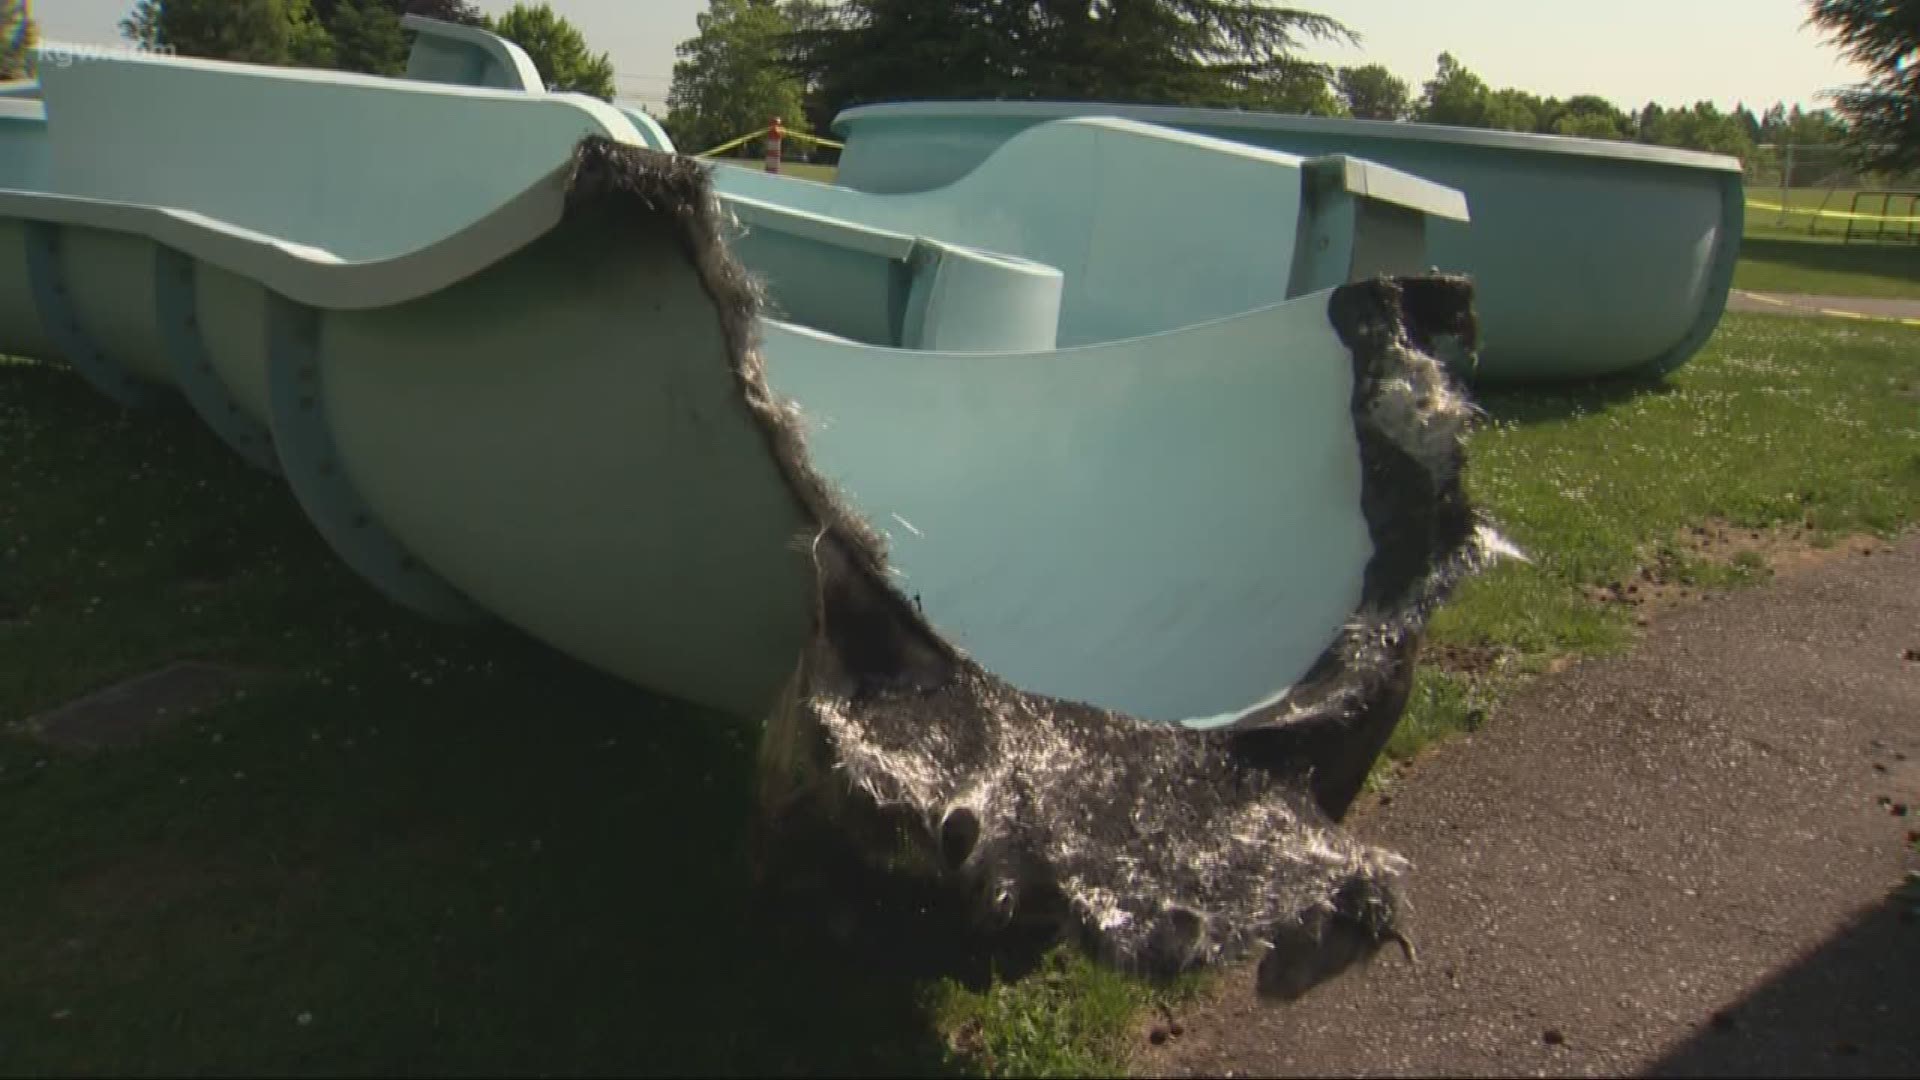 Police say someone set fire to the slide at the Wilson Pool in Southwest Portland, causing thousands of dollars in damages.